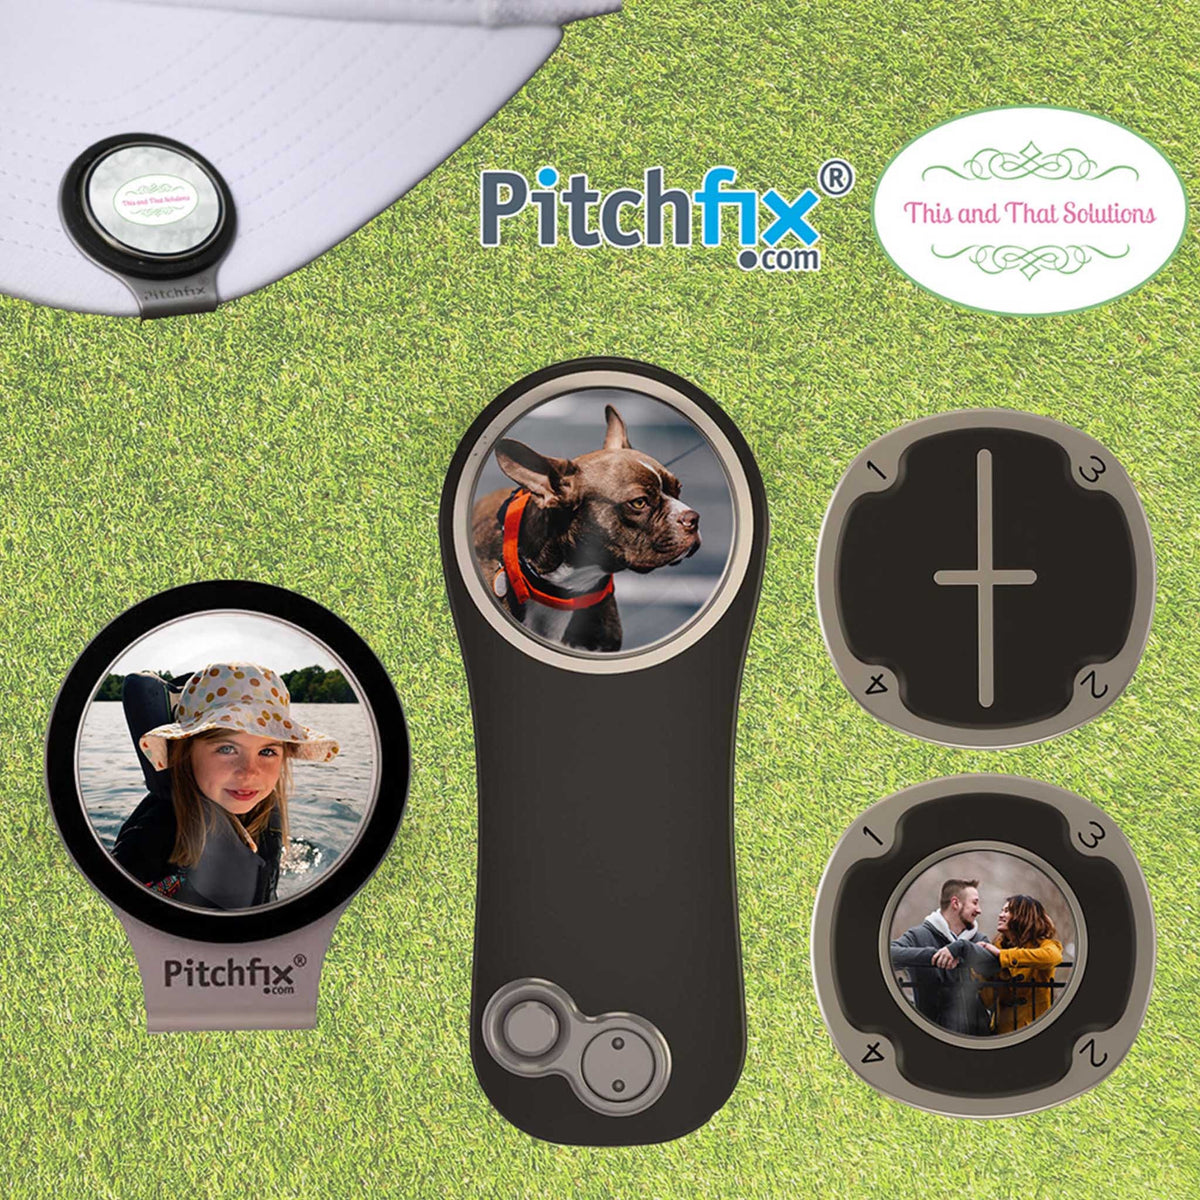 Personalized PitchFix Divot Tool | Golf Accessories | Golf Gifts | Good Players Mark Their Ball